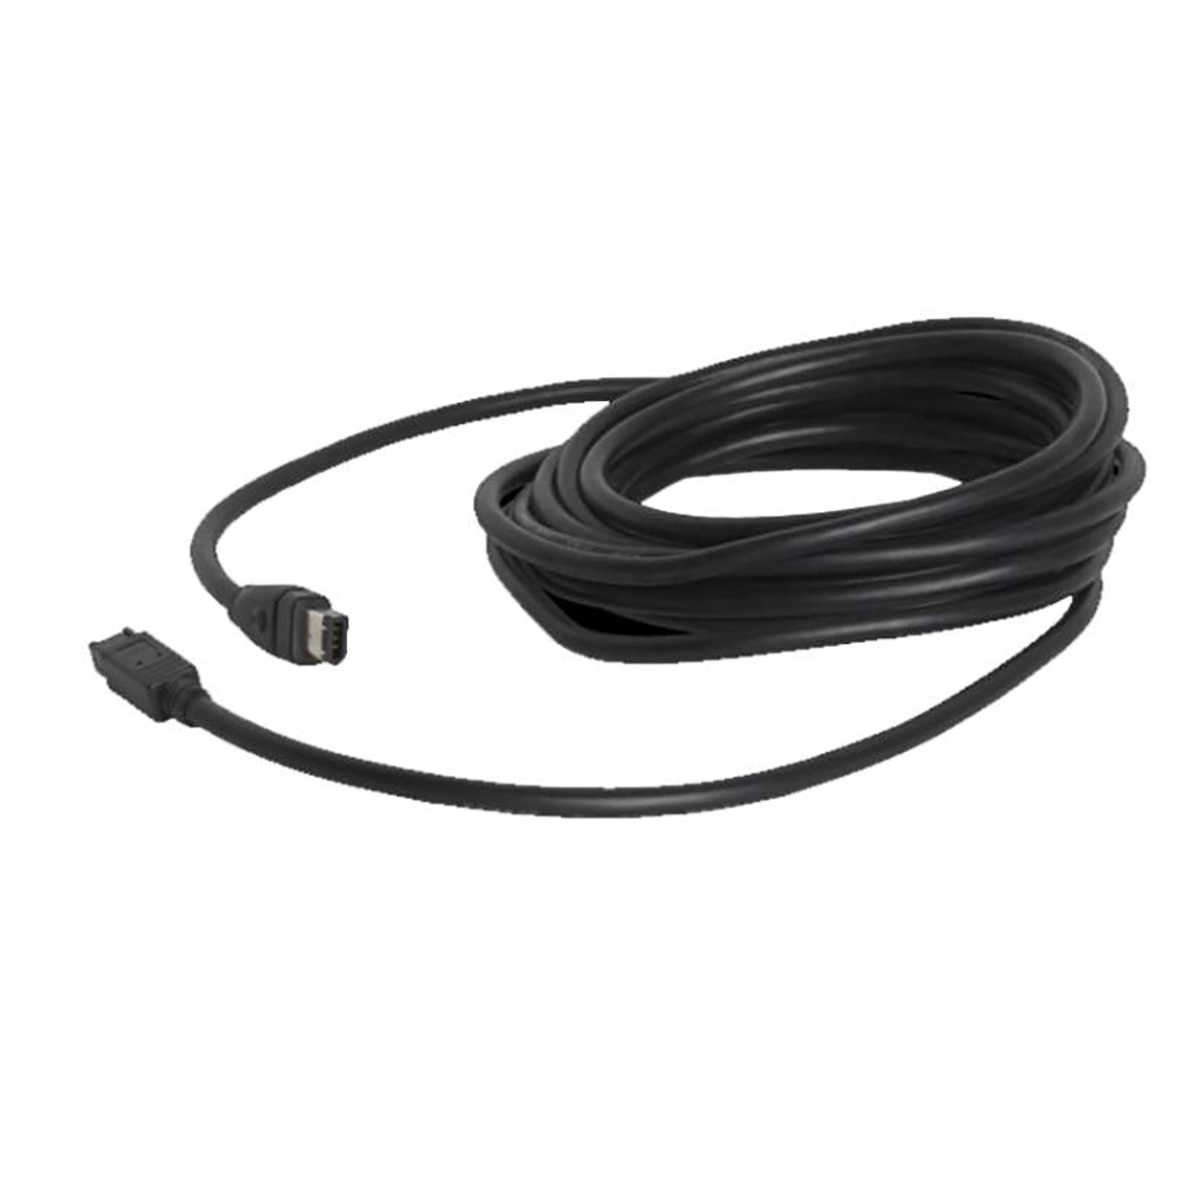 Hasselblad Firewire 400/800 Cable 4.5m HXD